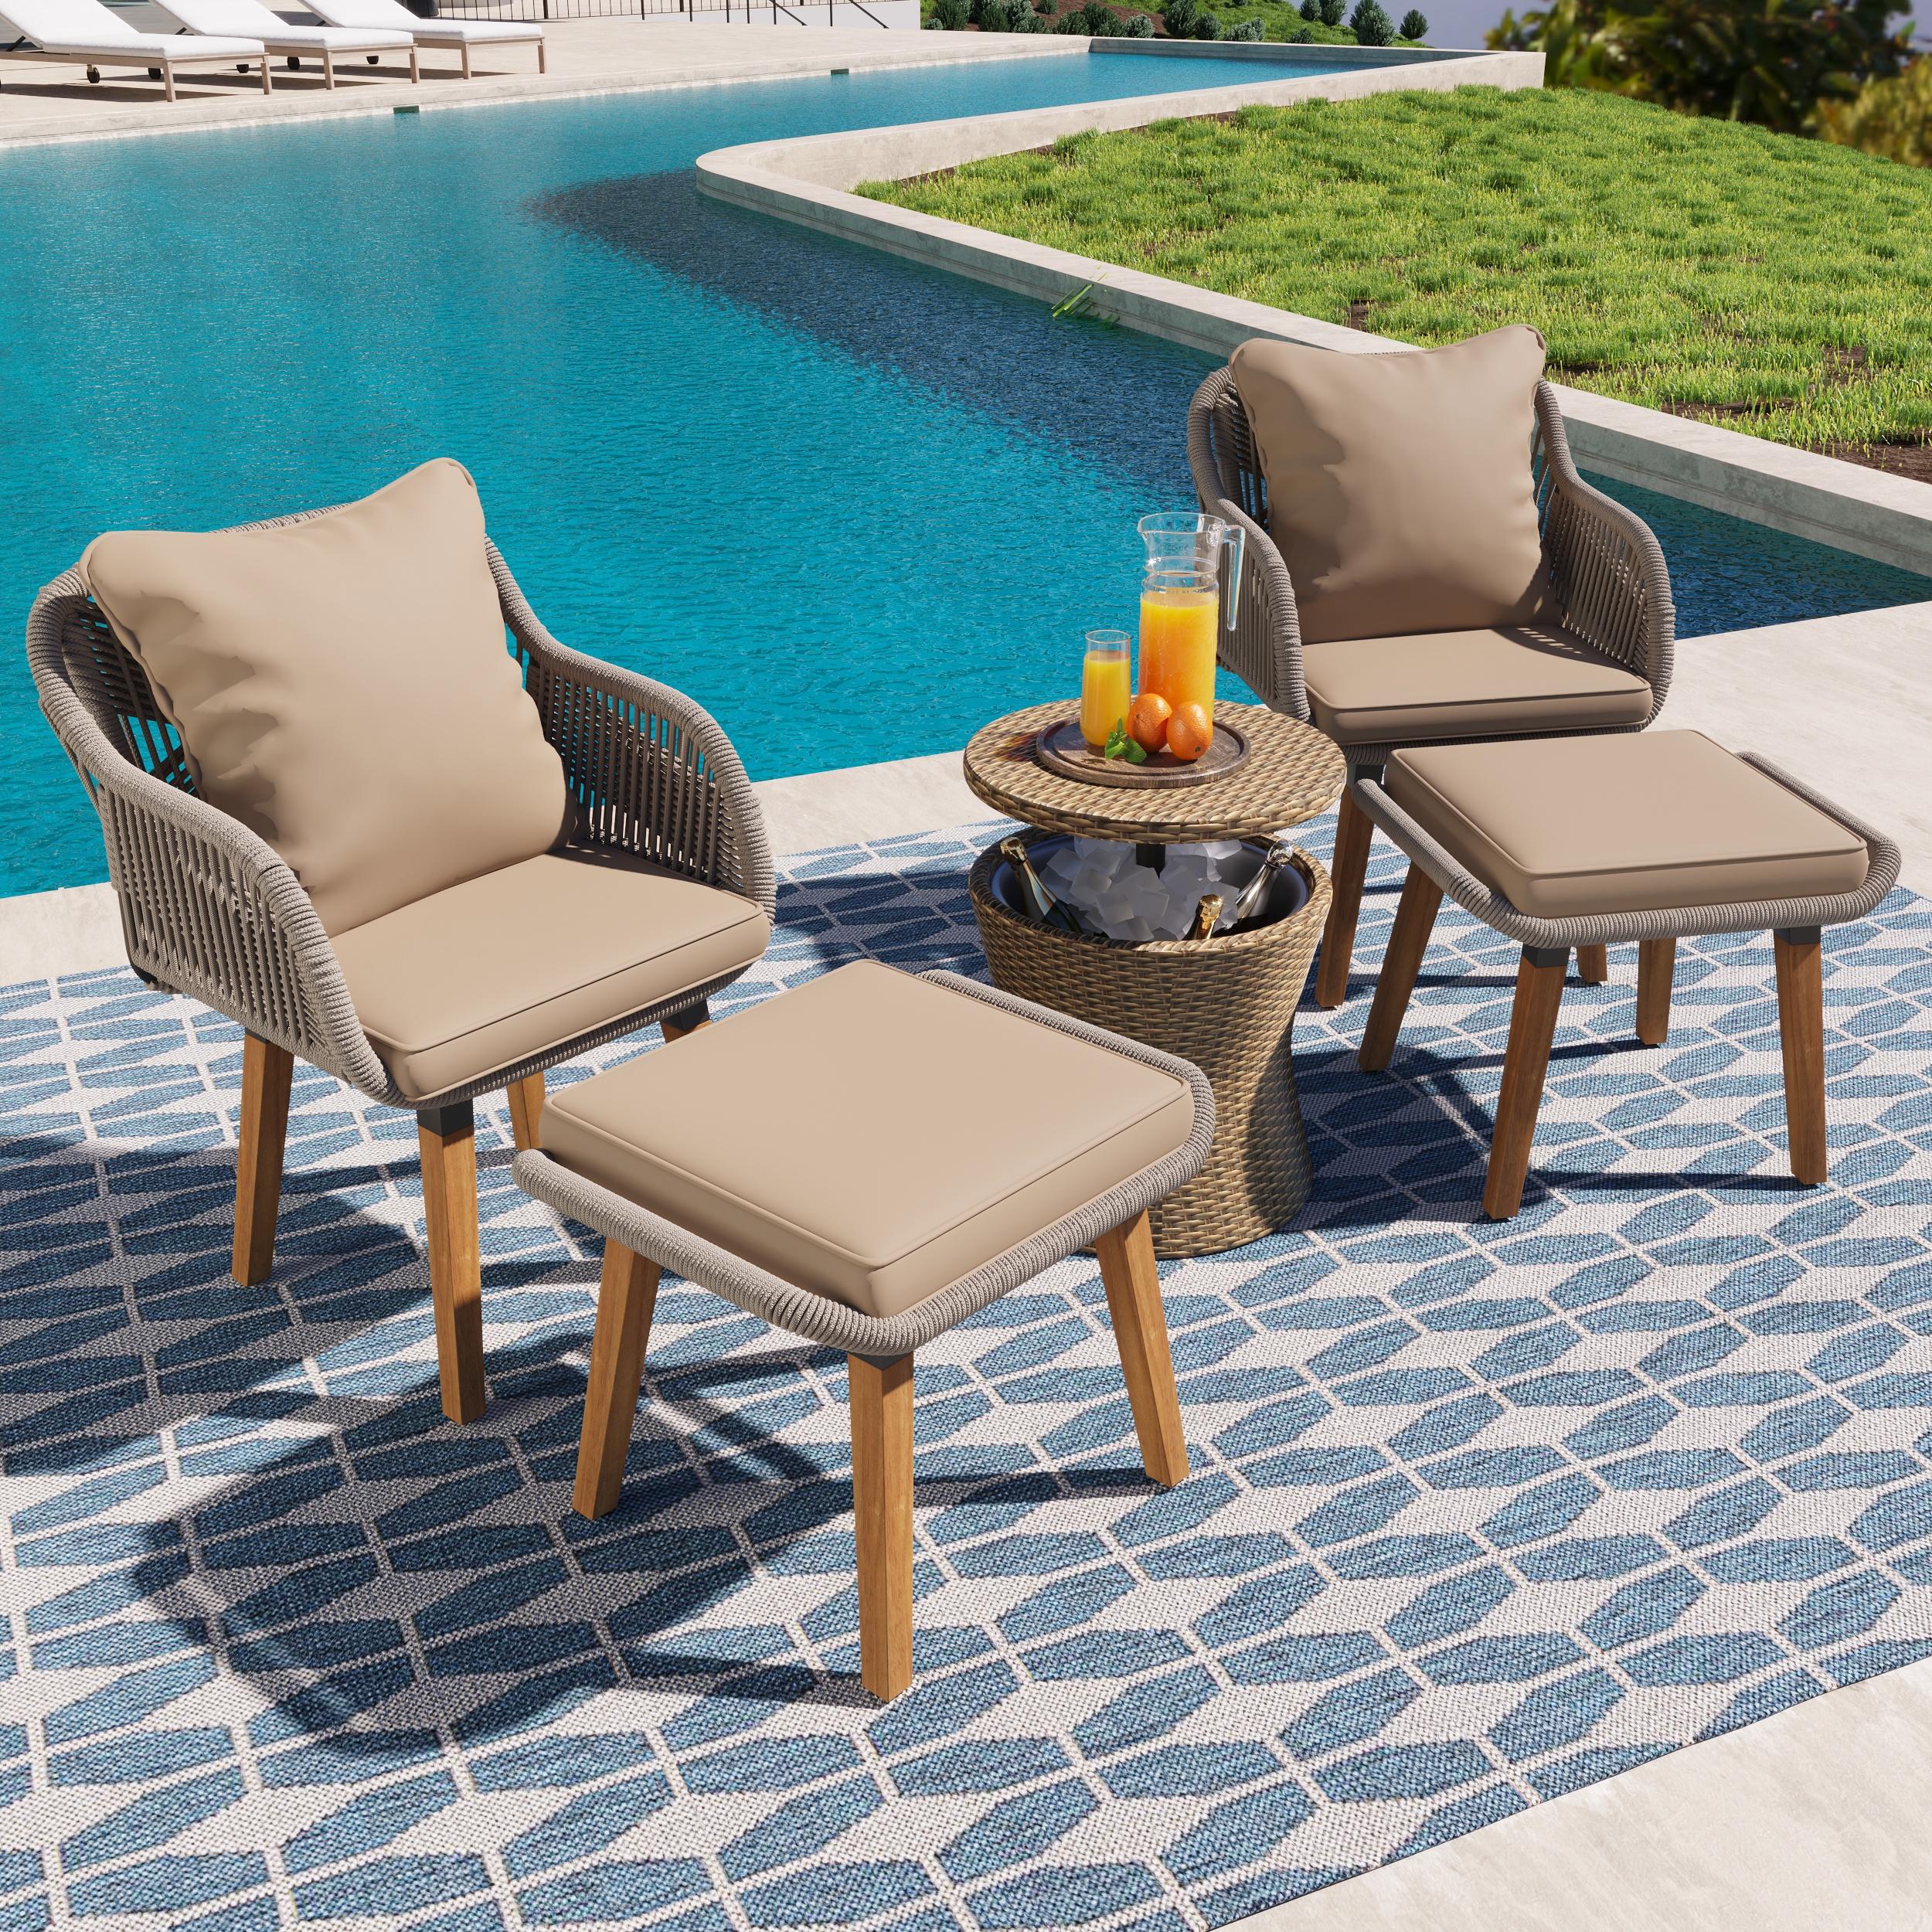 SYNGAR Patio Wicker Chairs Set, 5 PCS Patio Furniture Set with Coffee Table, Ottoman Footrest and Blue Cushions, Outside Sectional Sofa Set, Porch Balcony Lawn Pool Conversation Set, GE034 - image 1 of 11